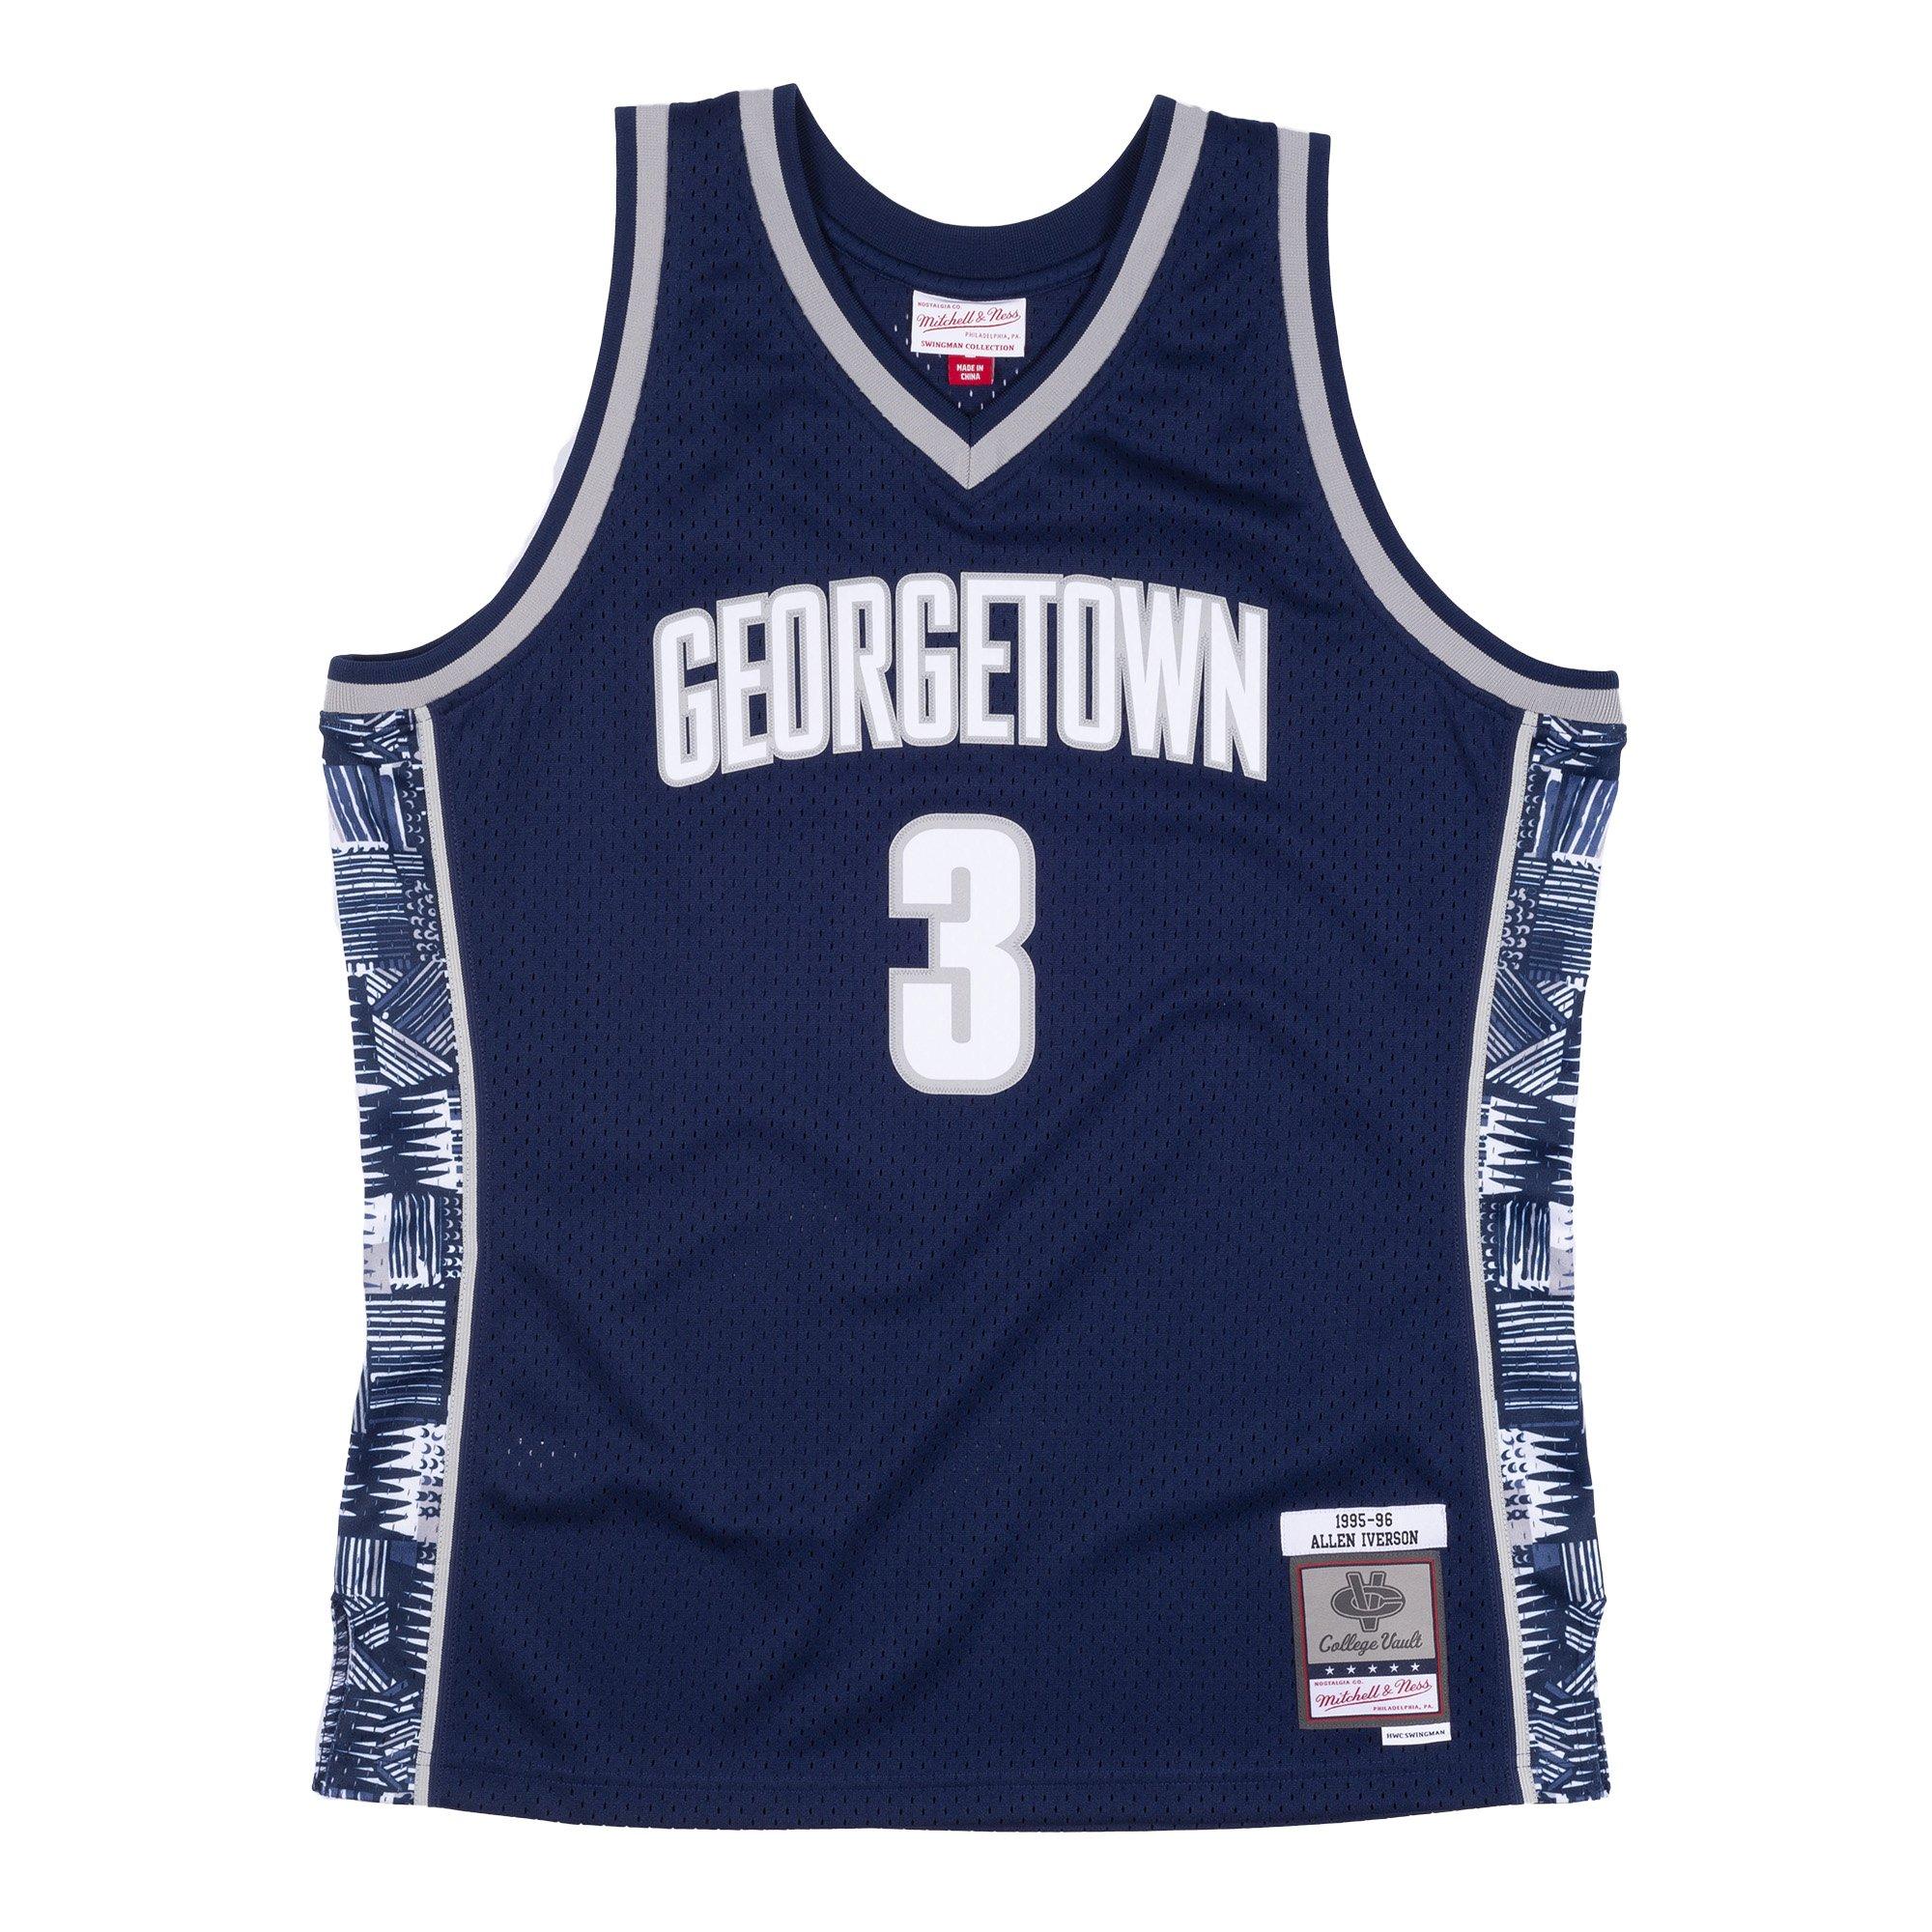 Allen Iverson Georgetown Hoyas Mitchell & Ness Swingman Jersey Youth  Large NWT